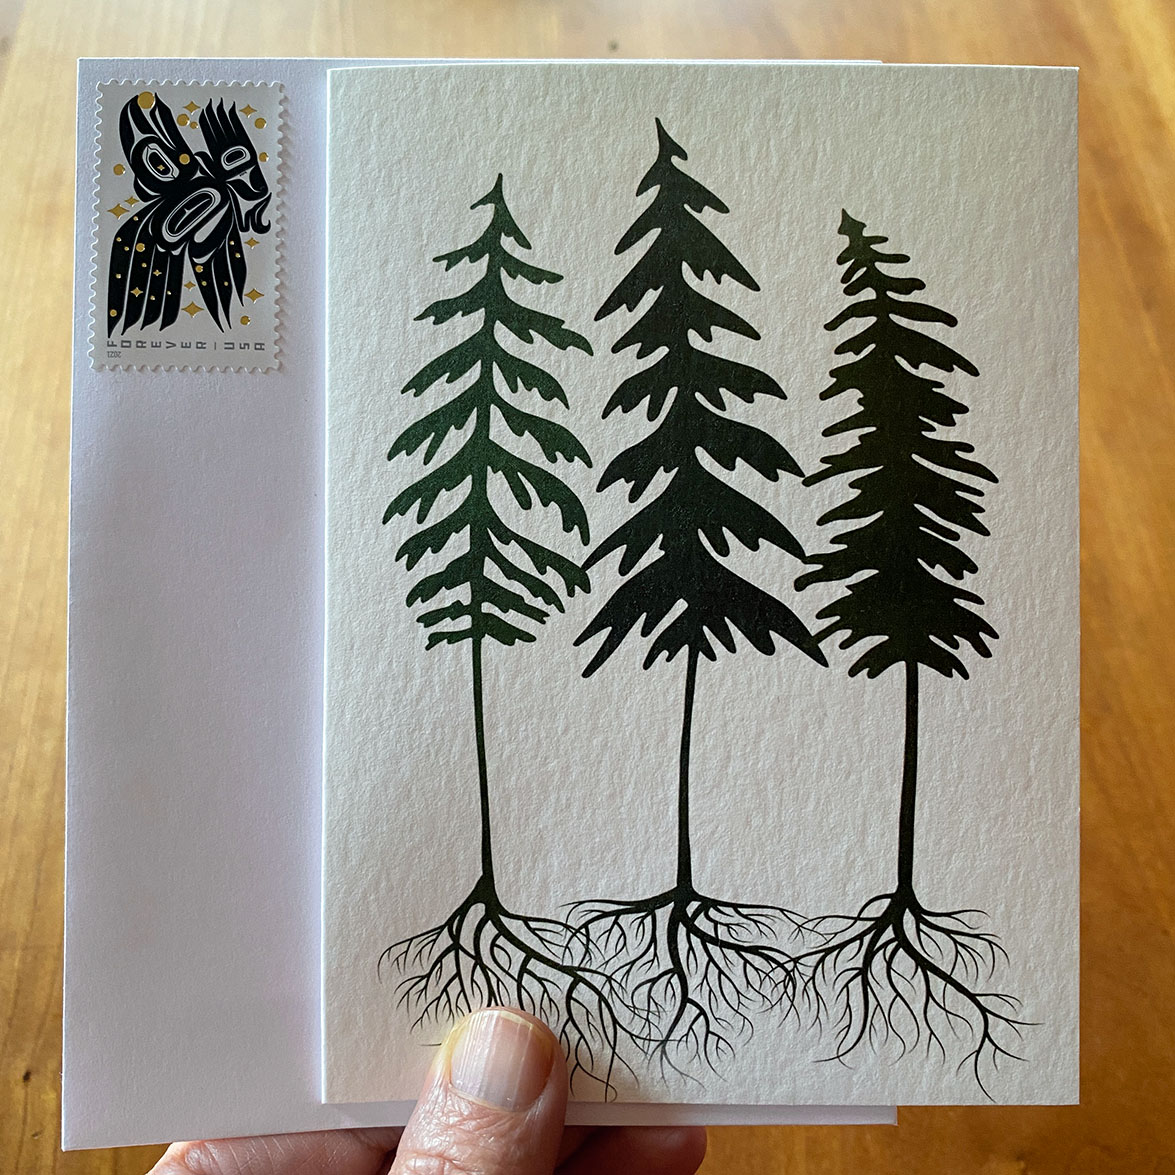 Three fir trees stand together with roots entwined on a gratitude card with envelope and raven stamp.